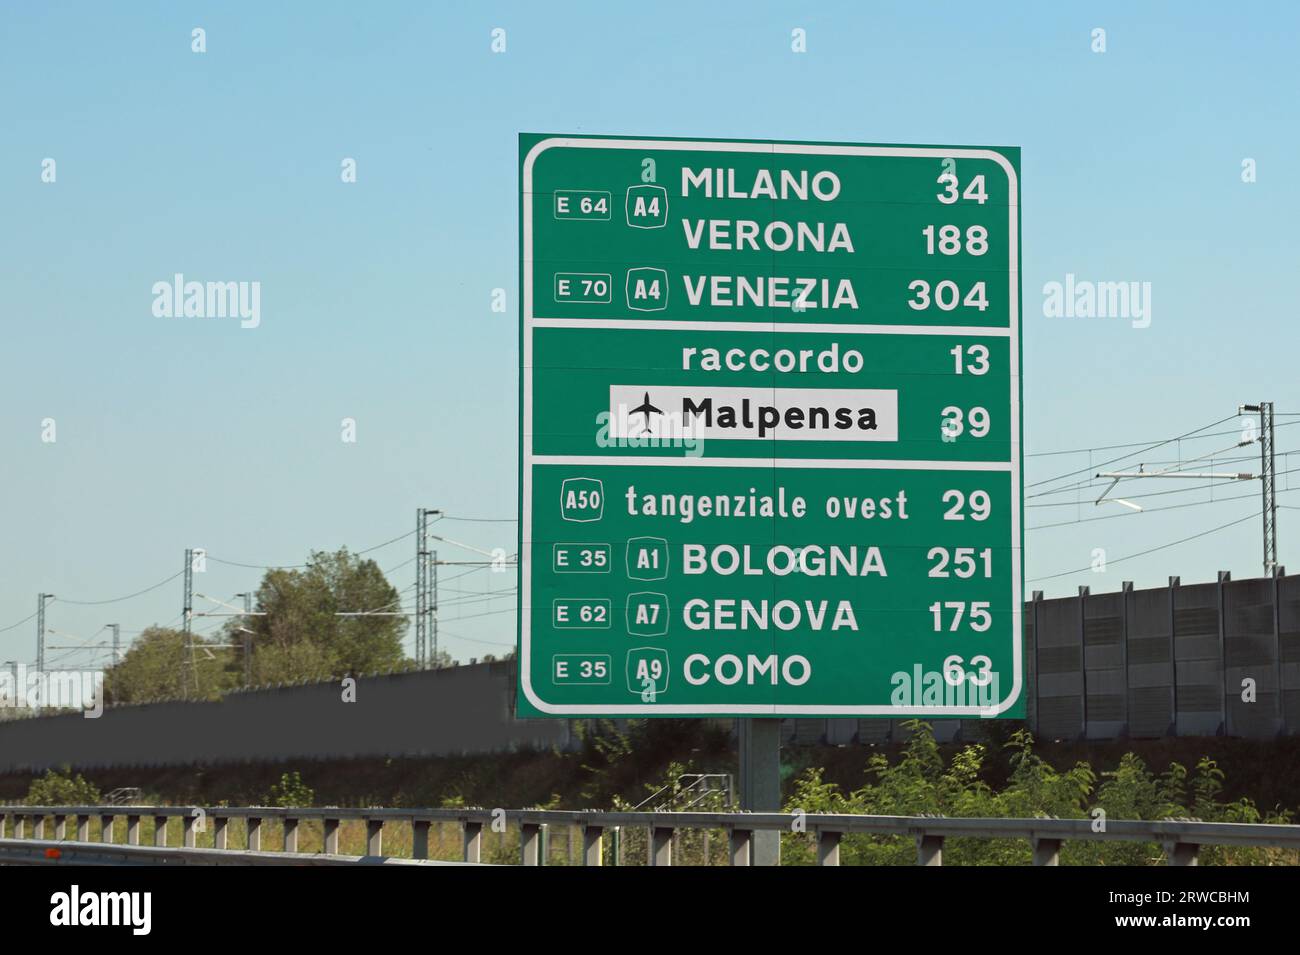 road sign on the motorway with the names of important Italian cities and directions to the MALPENSA airport in Milan Stock Photo